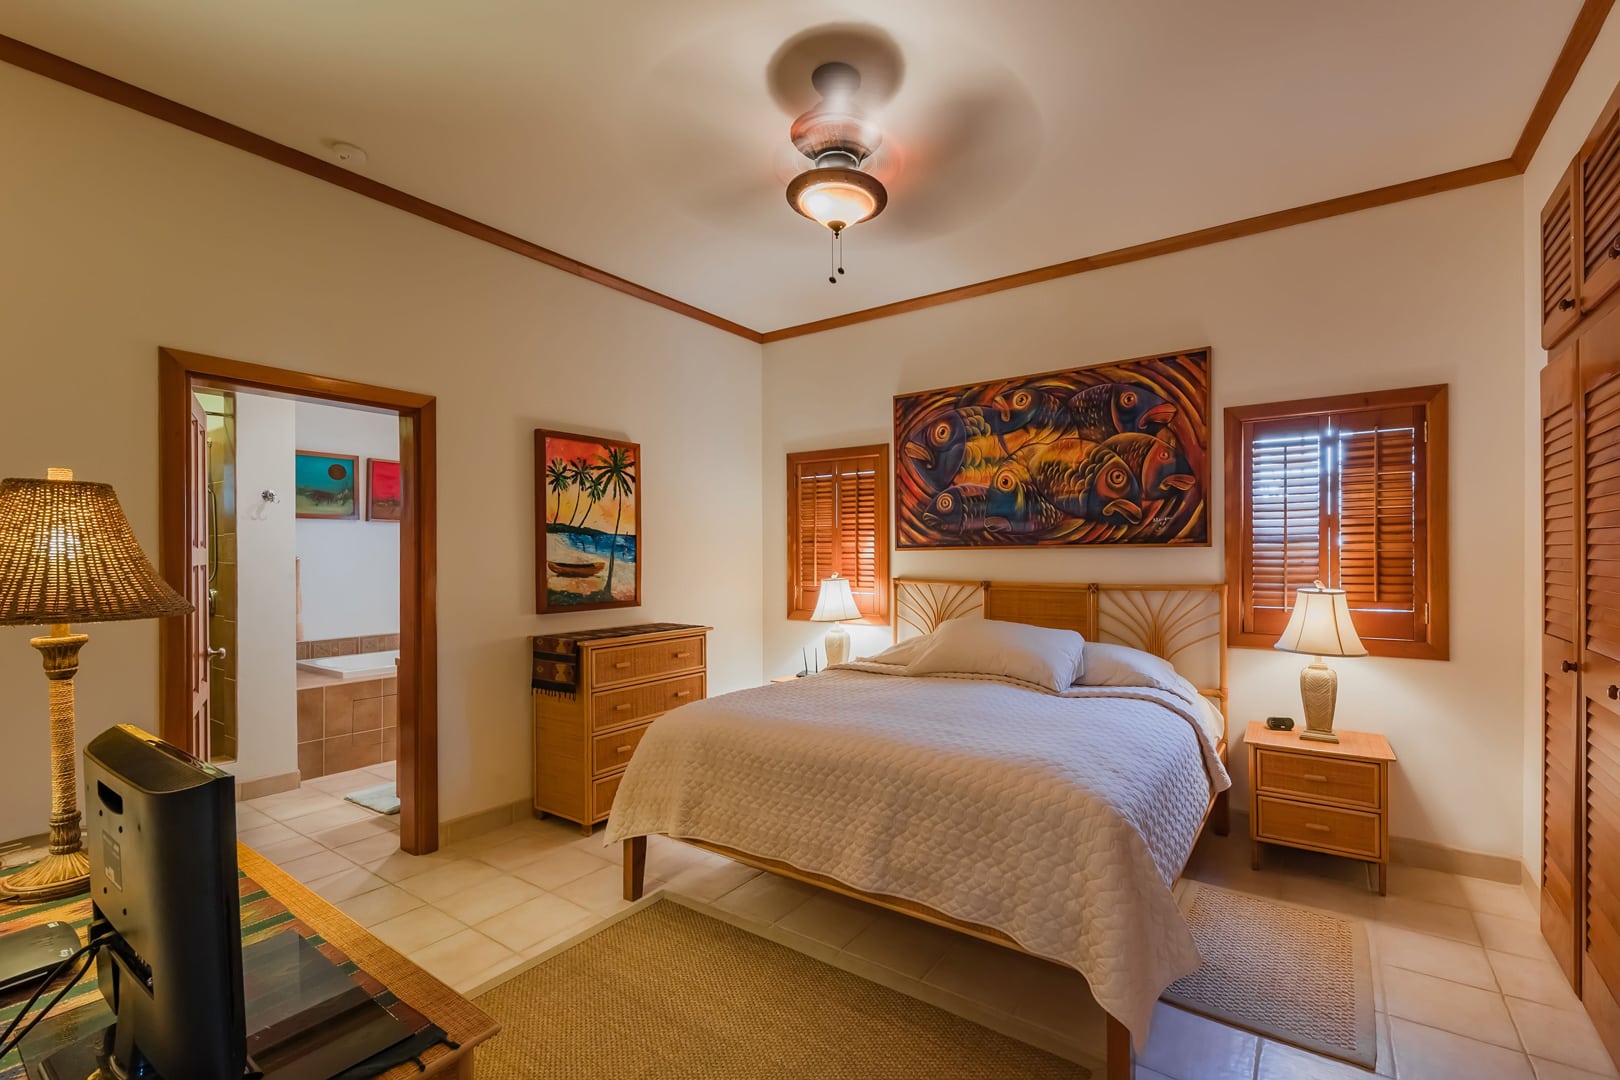 Master bedroom with private bath in our ground floor beach walkout villa at Tara Del Sol, San Pedro Belize